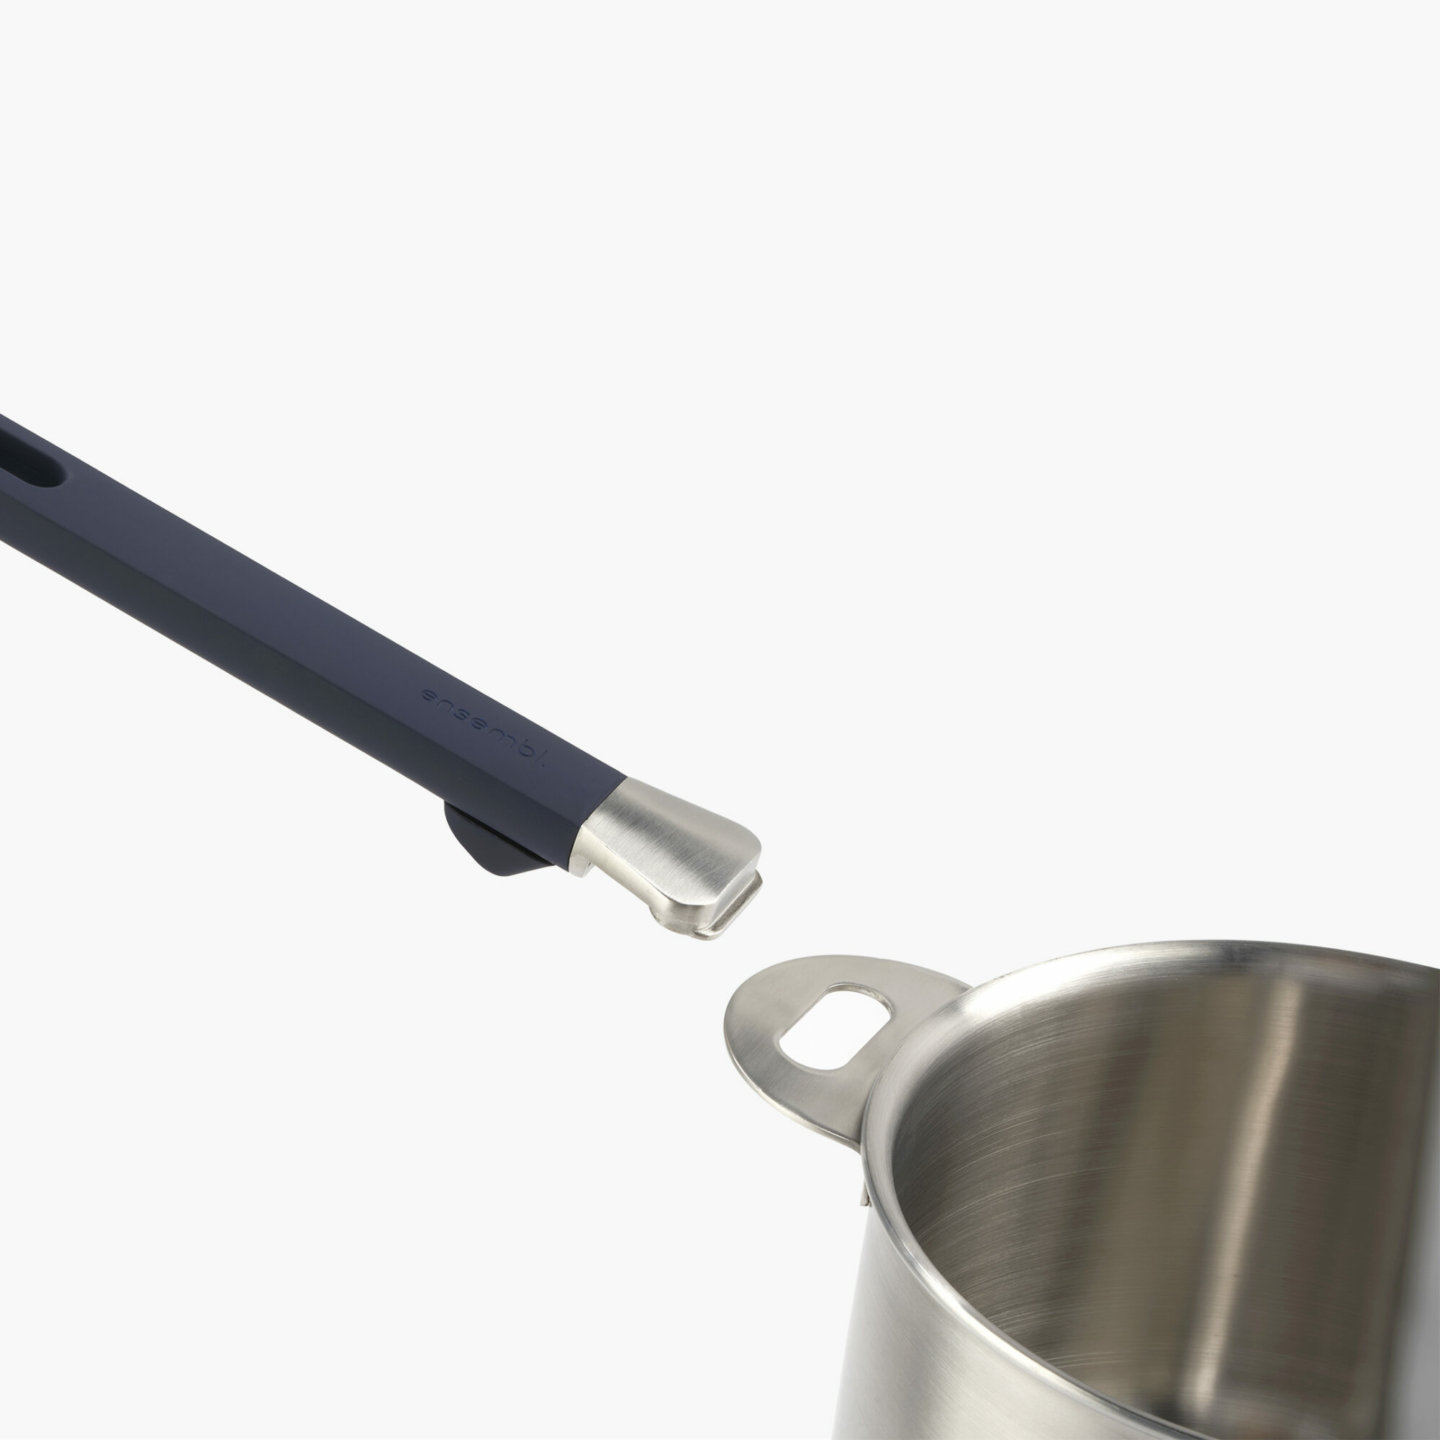 Stackware removable handle in action with saucepan